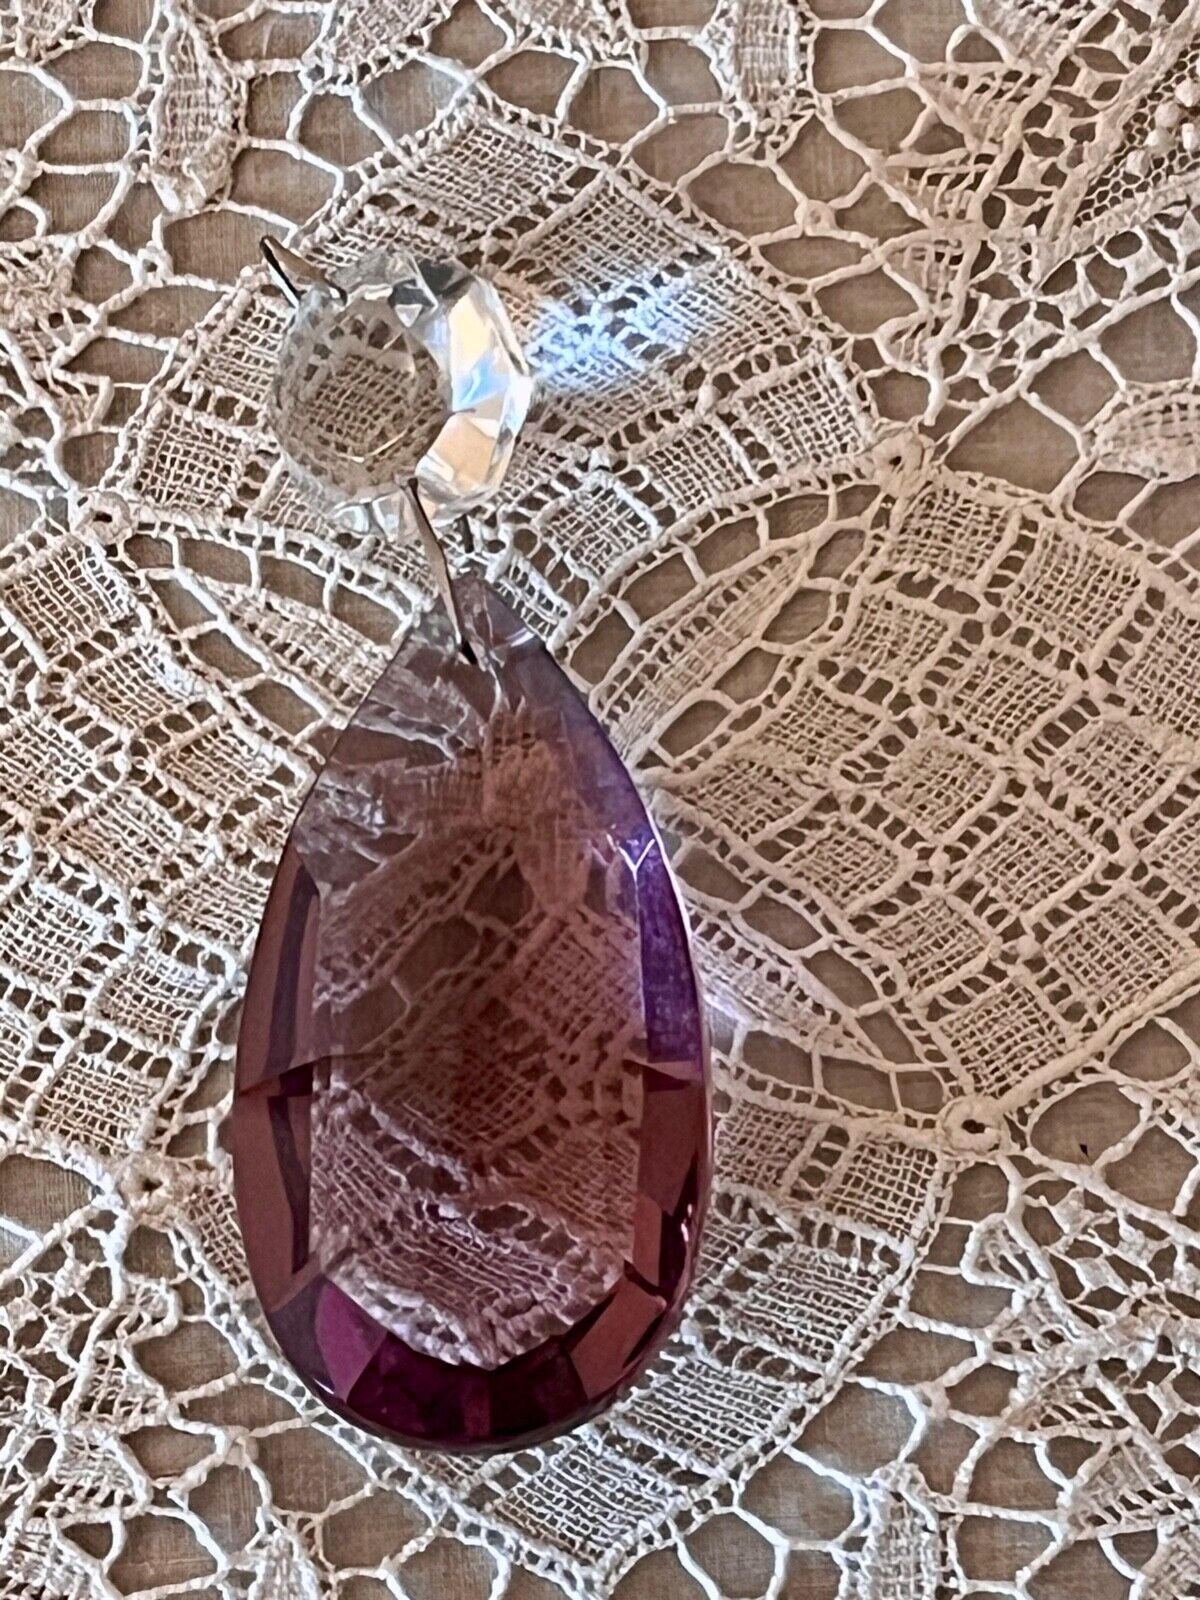 Gorgeous Amethyst Purple Pendalogue Chandelier Crystals. 63 mm, 2.5 inches.